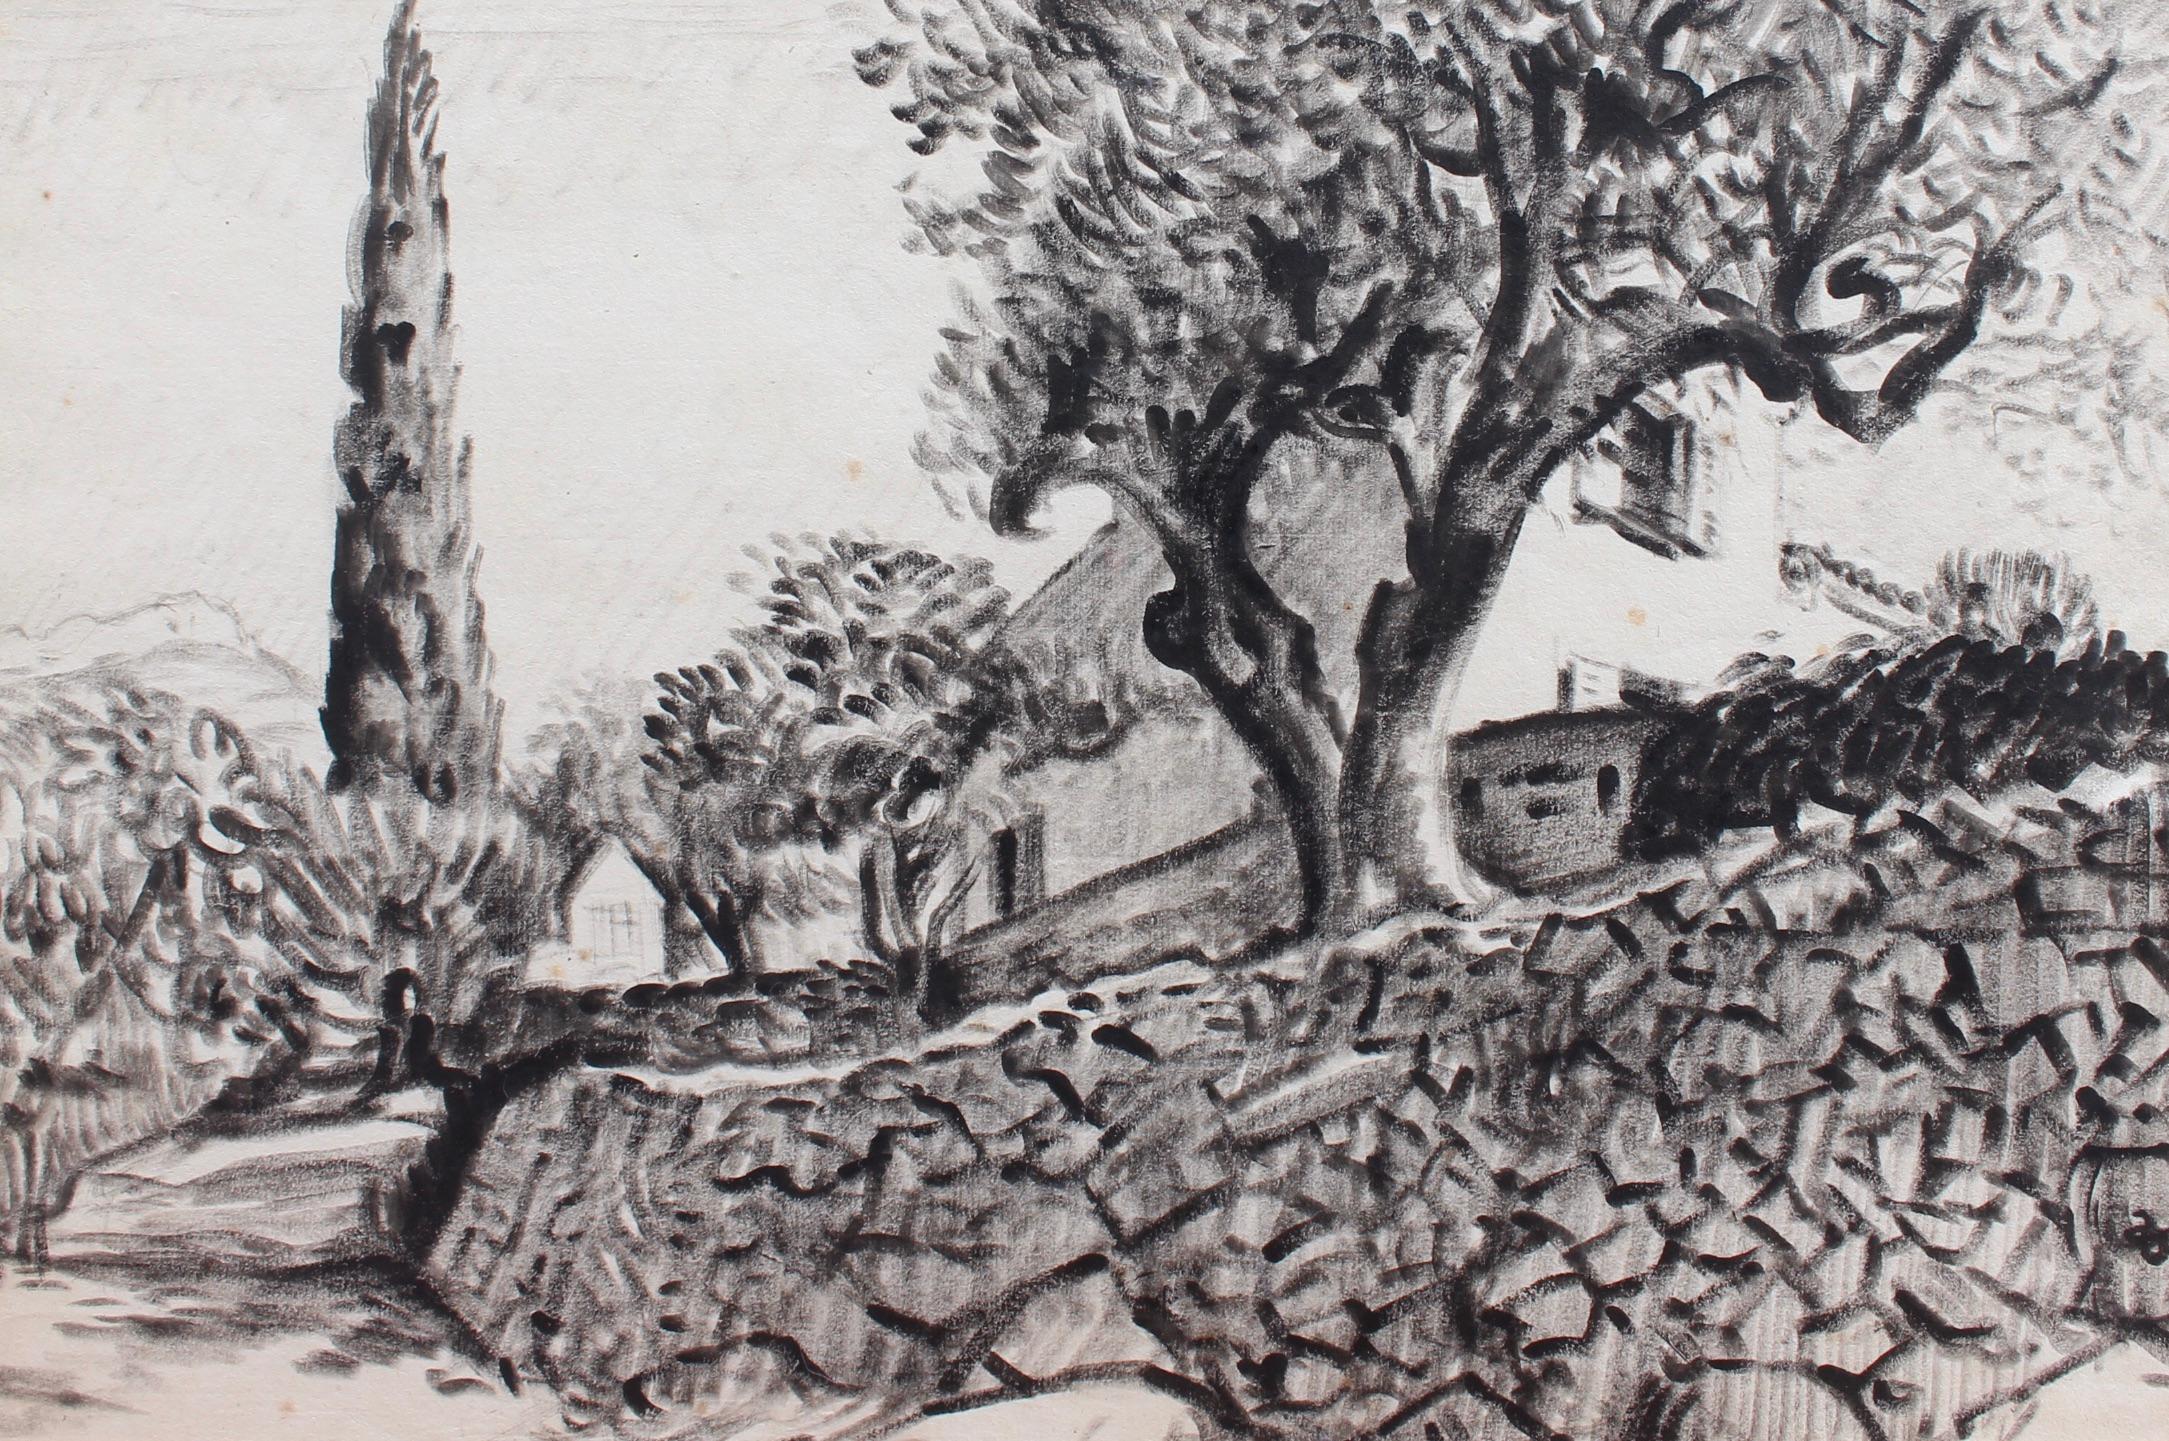 The Olive Tree Behind the Stone Wall